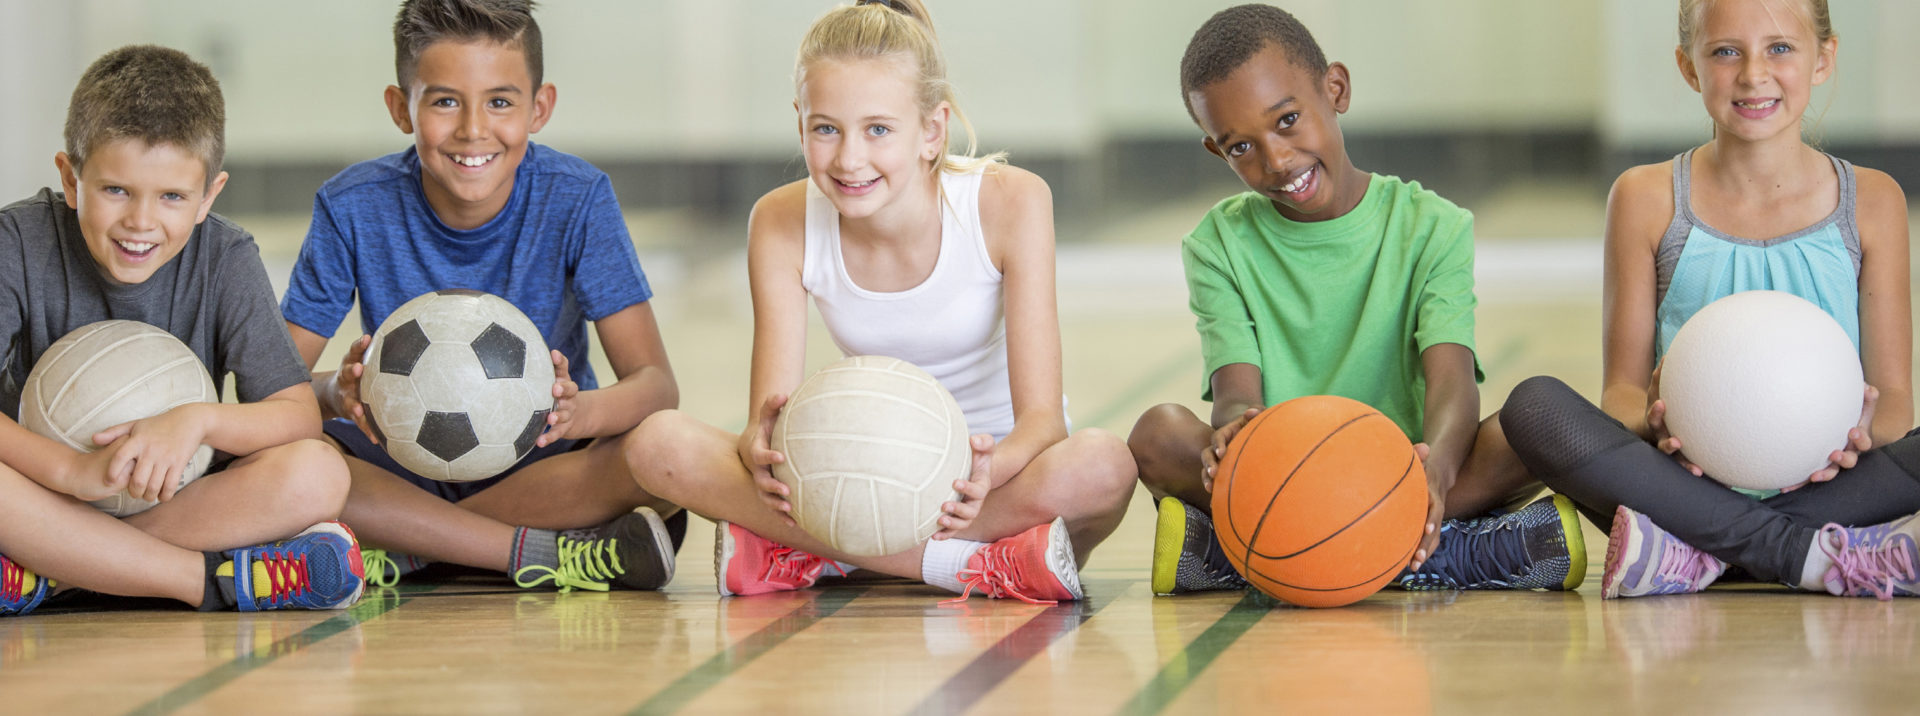 A multi-ethnic group of elementary age children are sitting in a row on the basketball court - they are smiling and looking at teh camera.